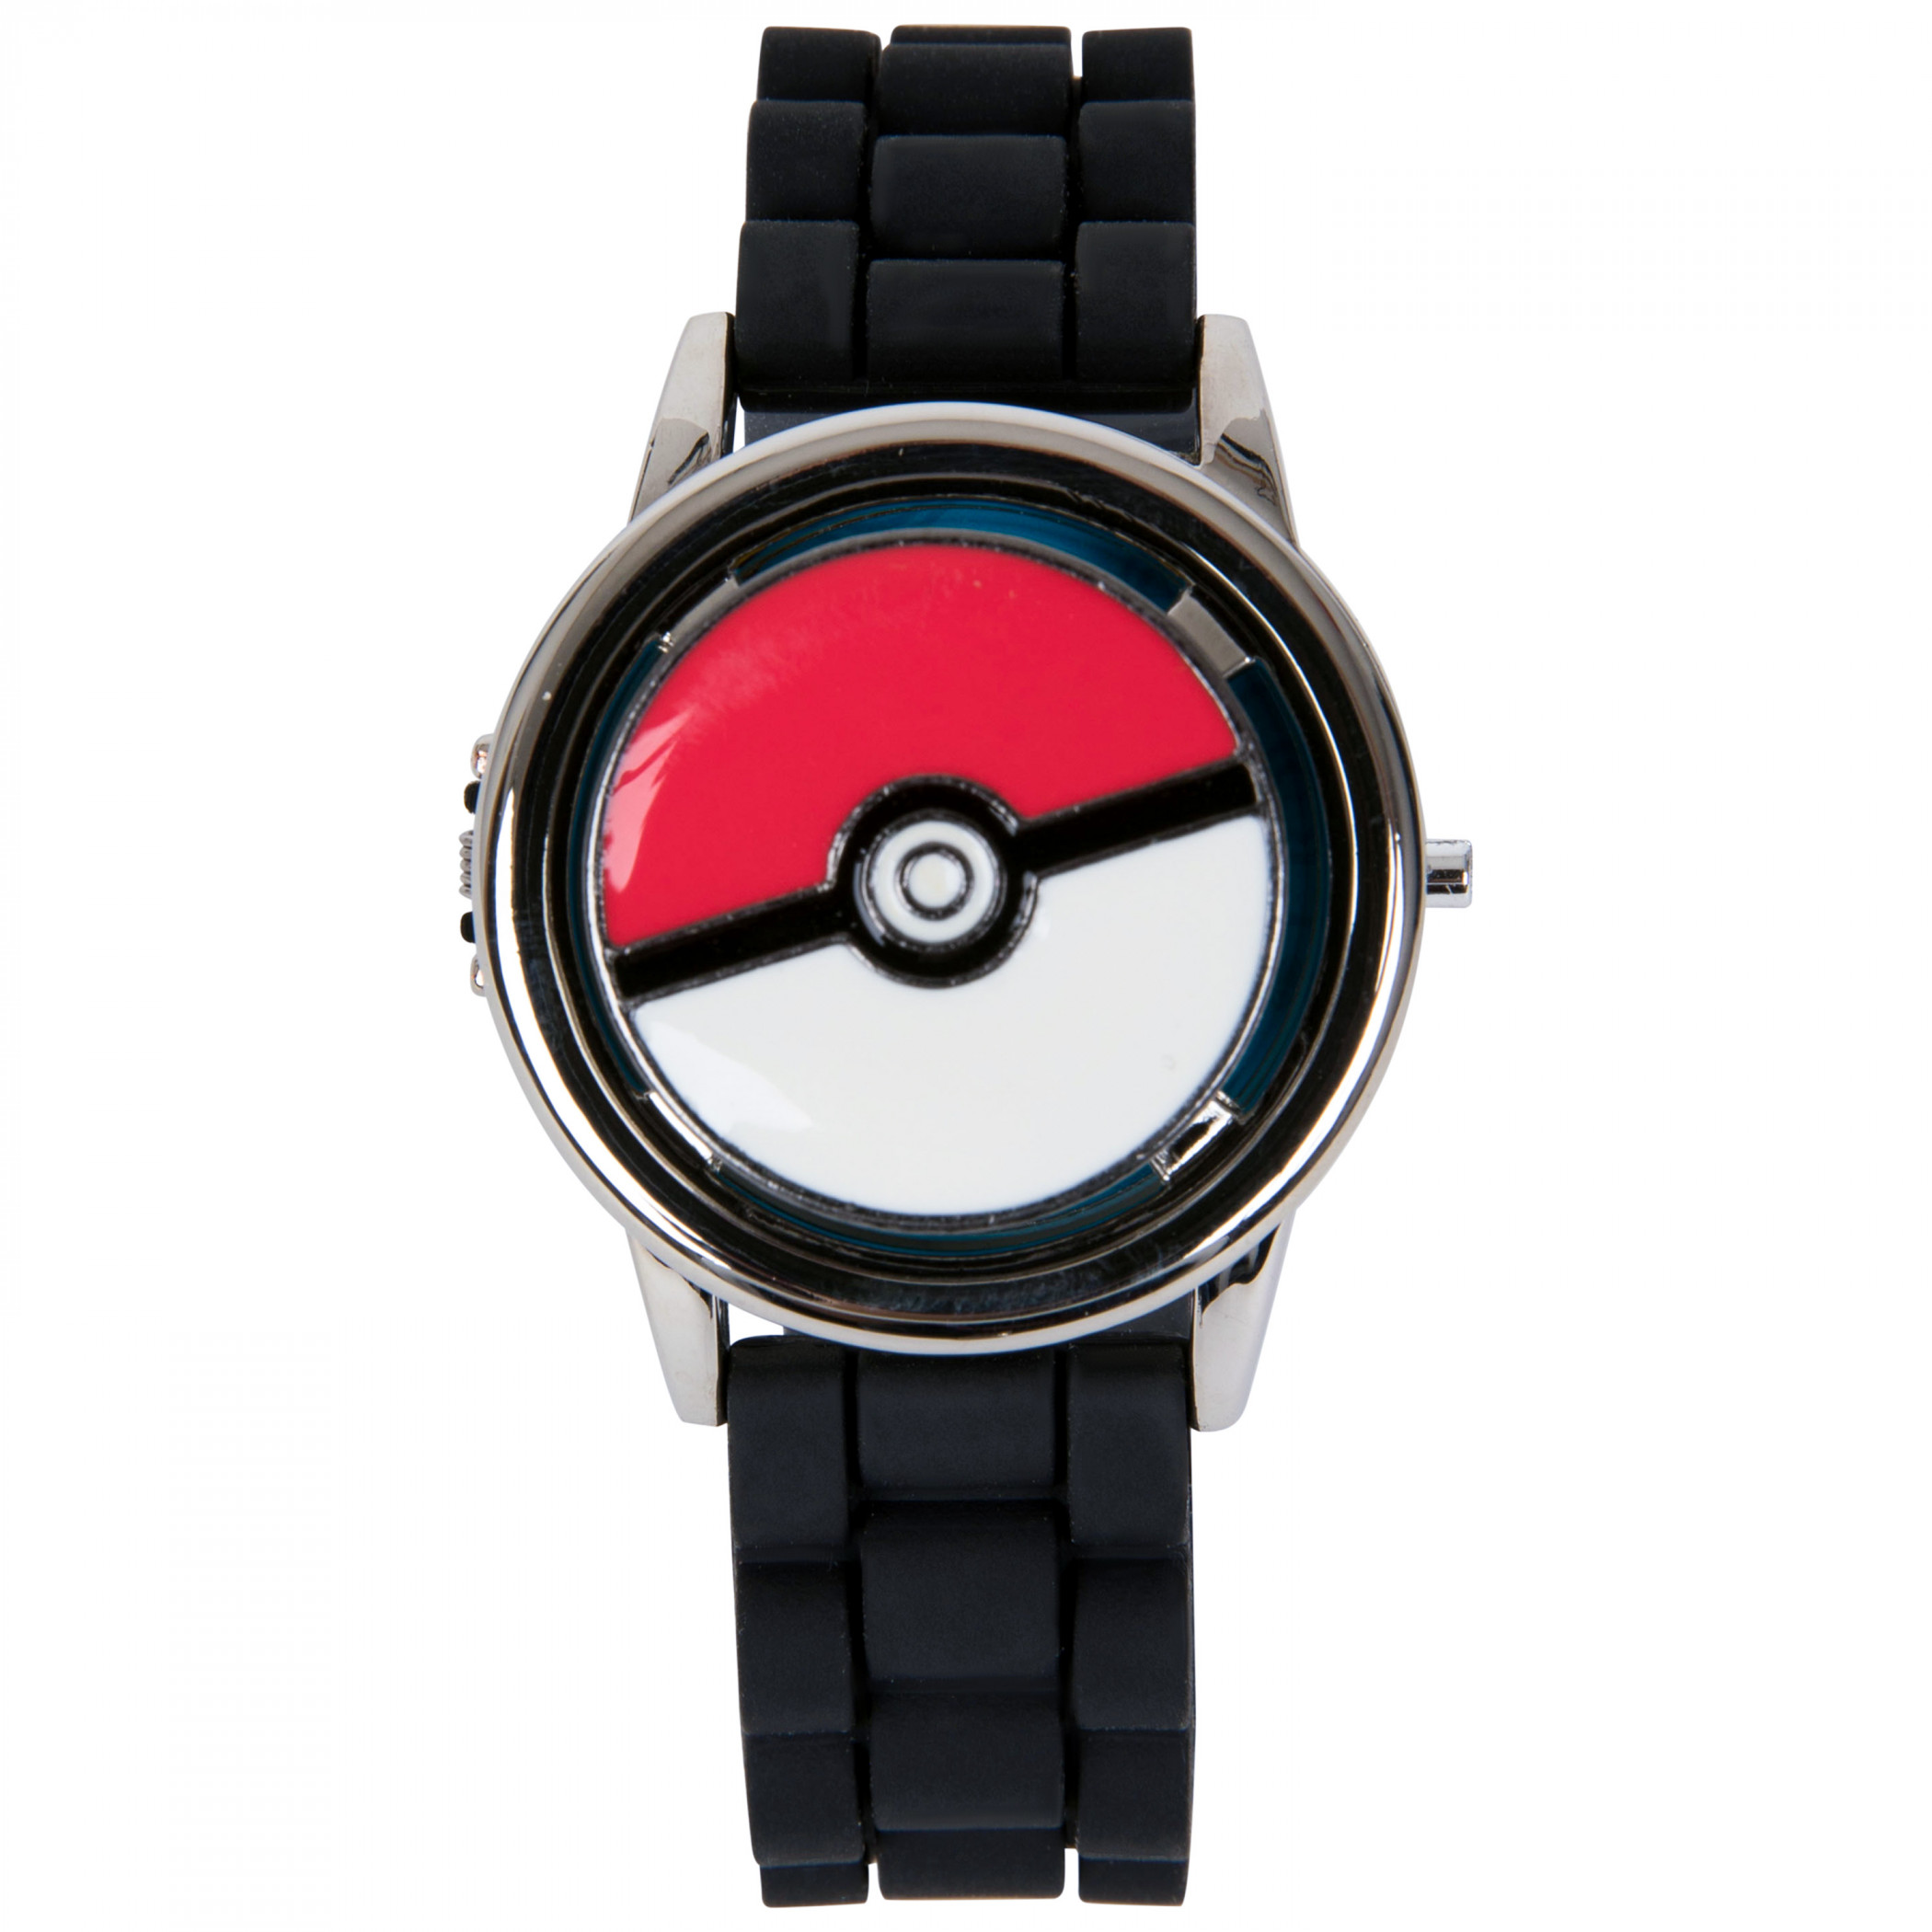 Pokemon Classic Pokeball Watch with Silicone Band